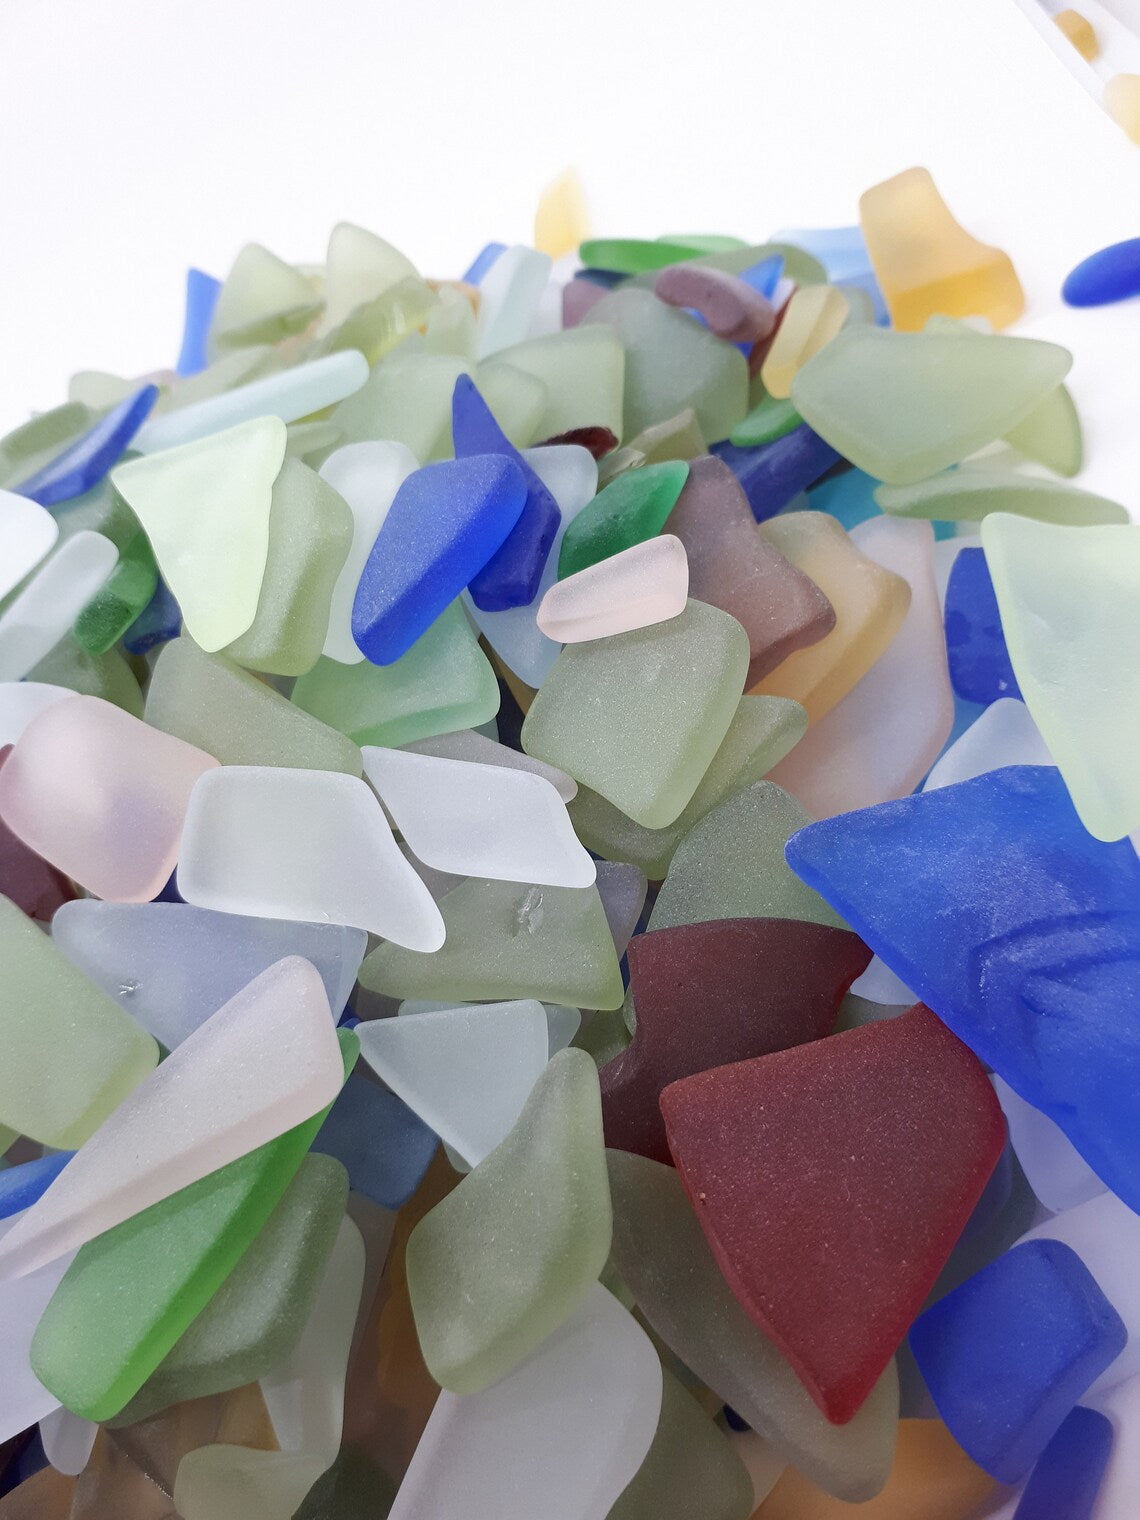 10 Pounds of sea glass - Mix of colors